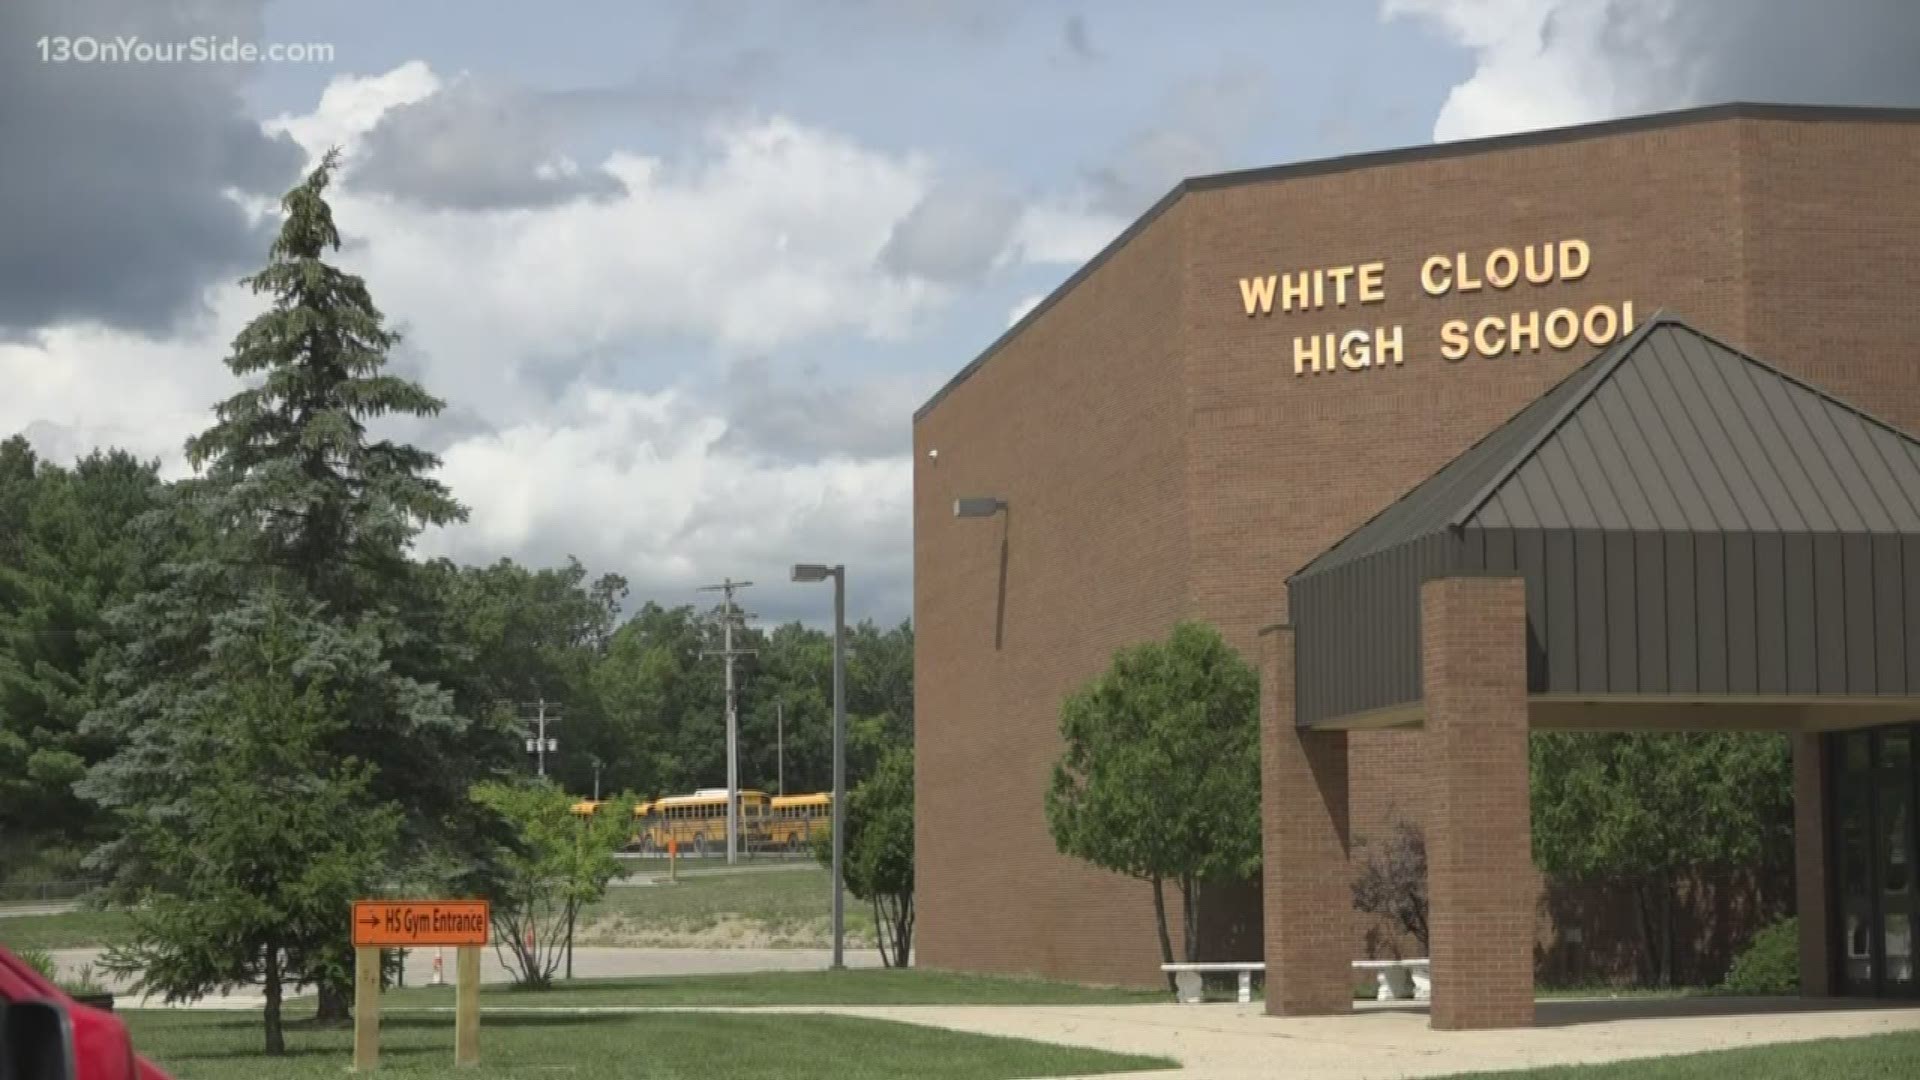 In 2010, White Cloud High School was forced to throw in the towel, and today similar circumstances are causing the school to pull their games this year.